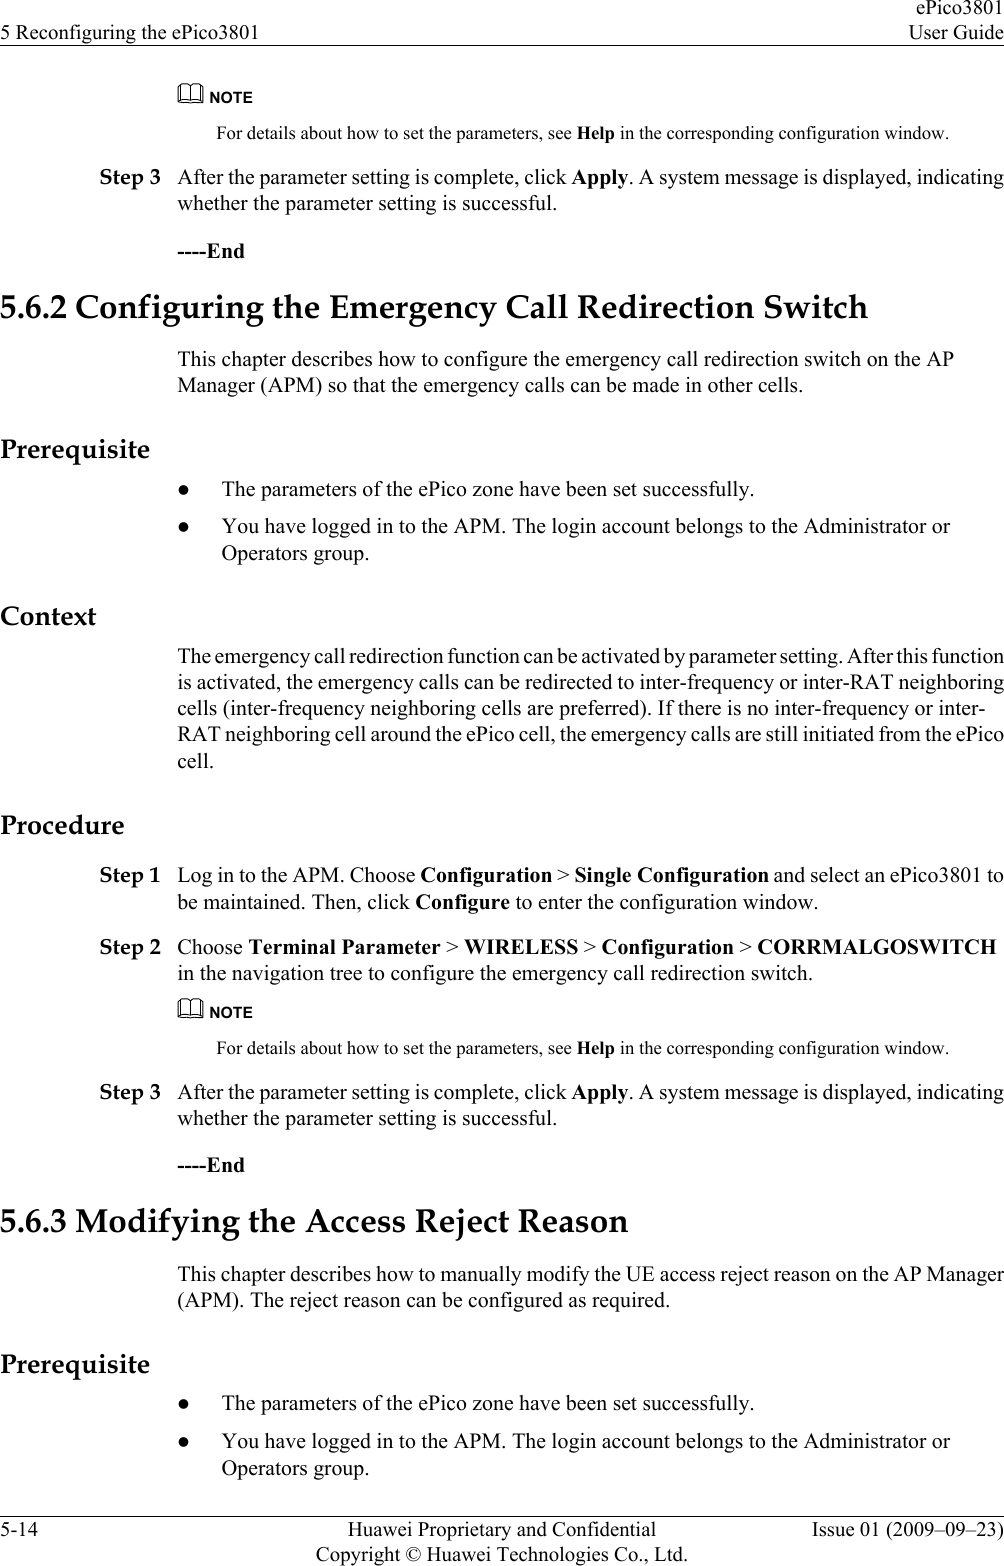 NOTEFor details about how to set the parameters, see Help in the corresponding configuration window.Step 3 After the parameter setting is complete, click Apply. A system message is displayed, indicatingwhether the parameter setting is successful.----End5.6.2 Configuring the Emergency Call Redirection SwitchThis chapter describes how to configure the emergency call redirection switch on the APManager (APM) so that the emergency calls can be made in other cells.PrerequisitelThe parameters of the ePico zone have been set successfully.lYou have logged in to the APM. The login account belongs to the Administrator orOperators group.ContextThe emergency call redirection function can be activated by parameter setting. After this functionis activated, the emergency calls can be redirected to inter-frequency or inter-RAT neighboringcells (inter-frequency neighboring cells are preferred). If there is no inter-frequency or inter-RAT neighboring cell around the ePico cell, the emergency calls are still initiated from the ePicocell.ProcedureStep 1 Log in to the APM. Choose Configuration &gt; Single Configuration and select an ePico3801 tobe maintained. Then, click Configure to enter the configuration window.Step 2 Choose Terminal Parameter &gt; WIRELESS &gt; Configuration &gt; CORRMALGOSWITCHin the navigation tree to configure the emergency call redirection switch.NOTEFor details about how to set the parameters, see Help in the corresponding configuration window.Step 3 After the parameter setting is complete, click Apply. A system message is displayed, indicatingwhether the parameter setting is successful.----End5.6.3 Modifying the Access Reject ReasonThis chapter describes how to manually modify the UE access reject reason on the AP Manager(APM). The reject reason can be configured as required.PrerequisitelThe parameters of the ePico zone have been set successfully.lYou have logged in to the APM. The login account belongs to the Administrator orOperators group.5 Reconfiguring the ePico3801ePico3801User Guide5-14 Huawei Proprietary and ConfidentialCopyright © Huawei Technologies Co., Ltd.Issue 01 (2009–09–23)